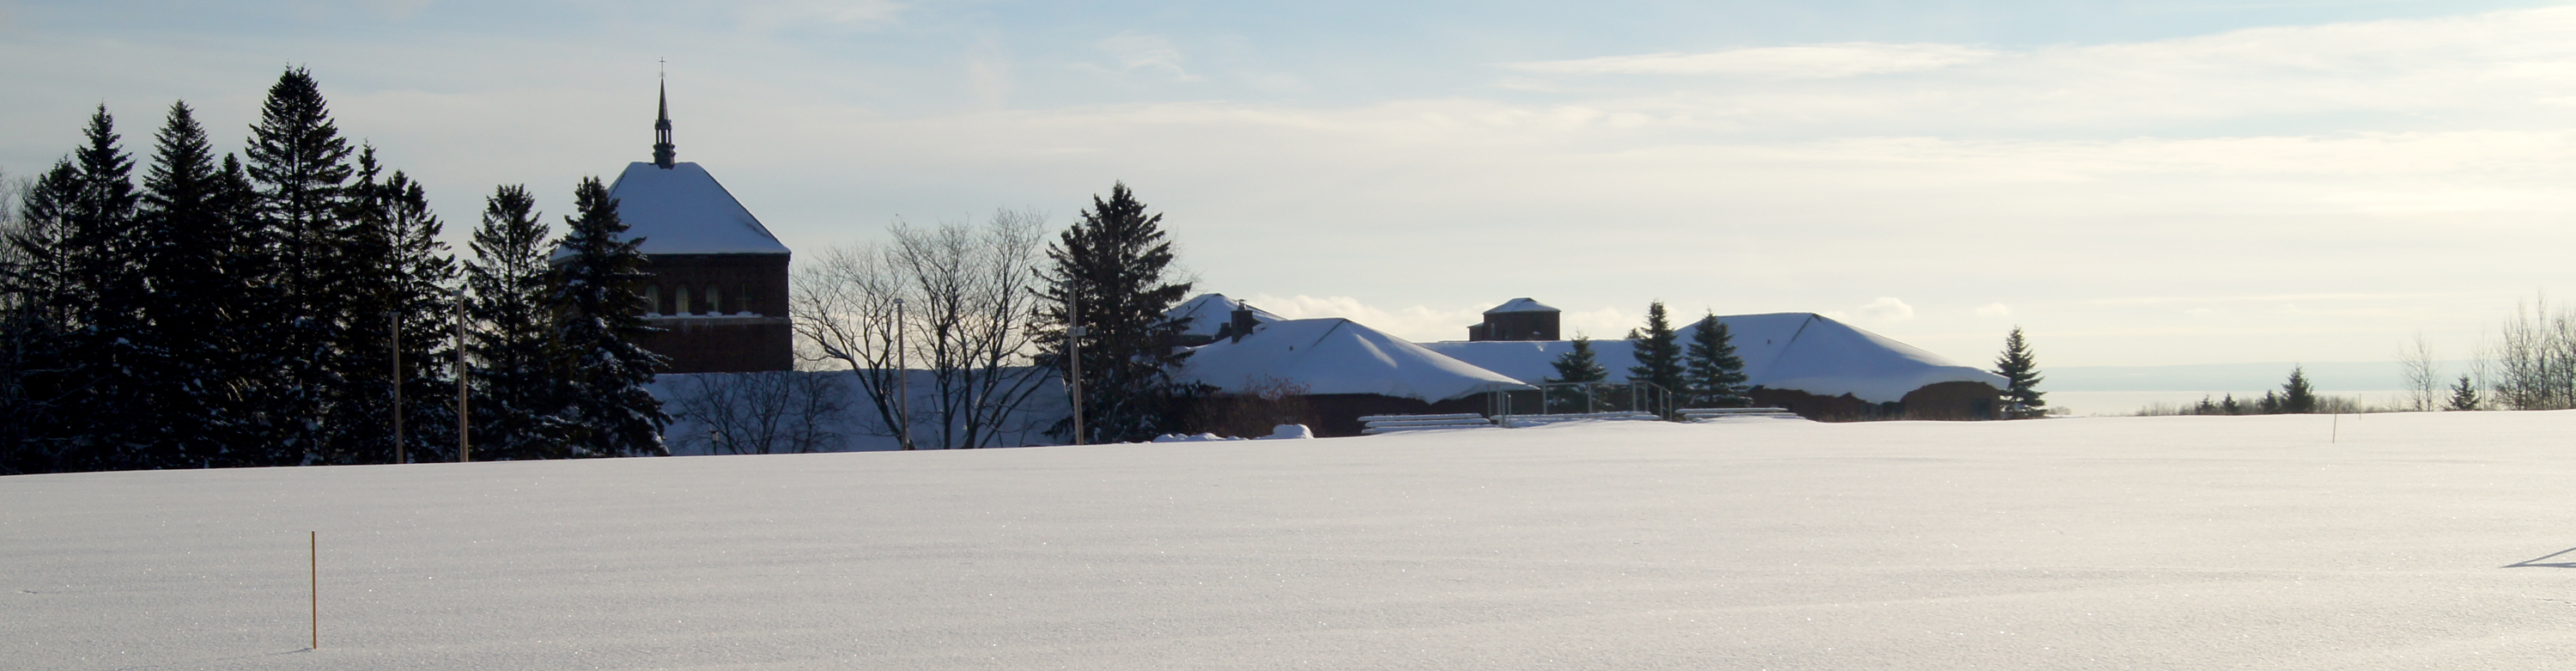 Snow-covered field behind the Monastery